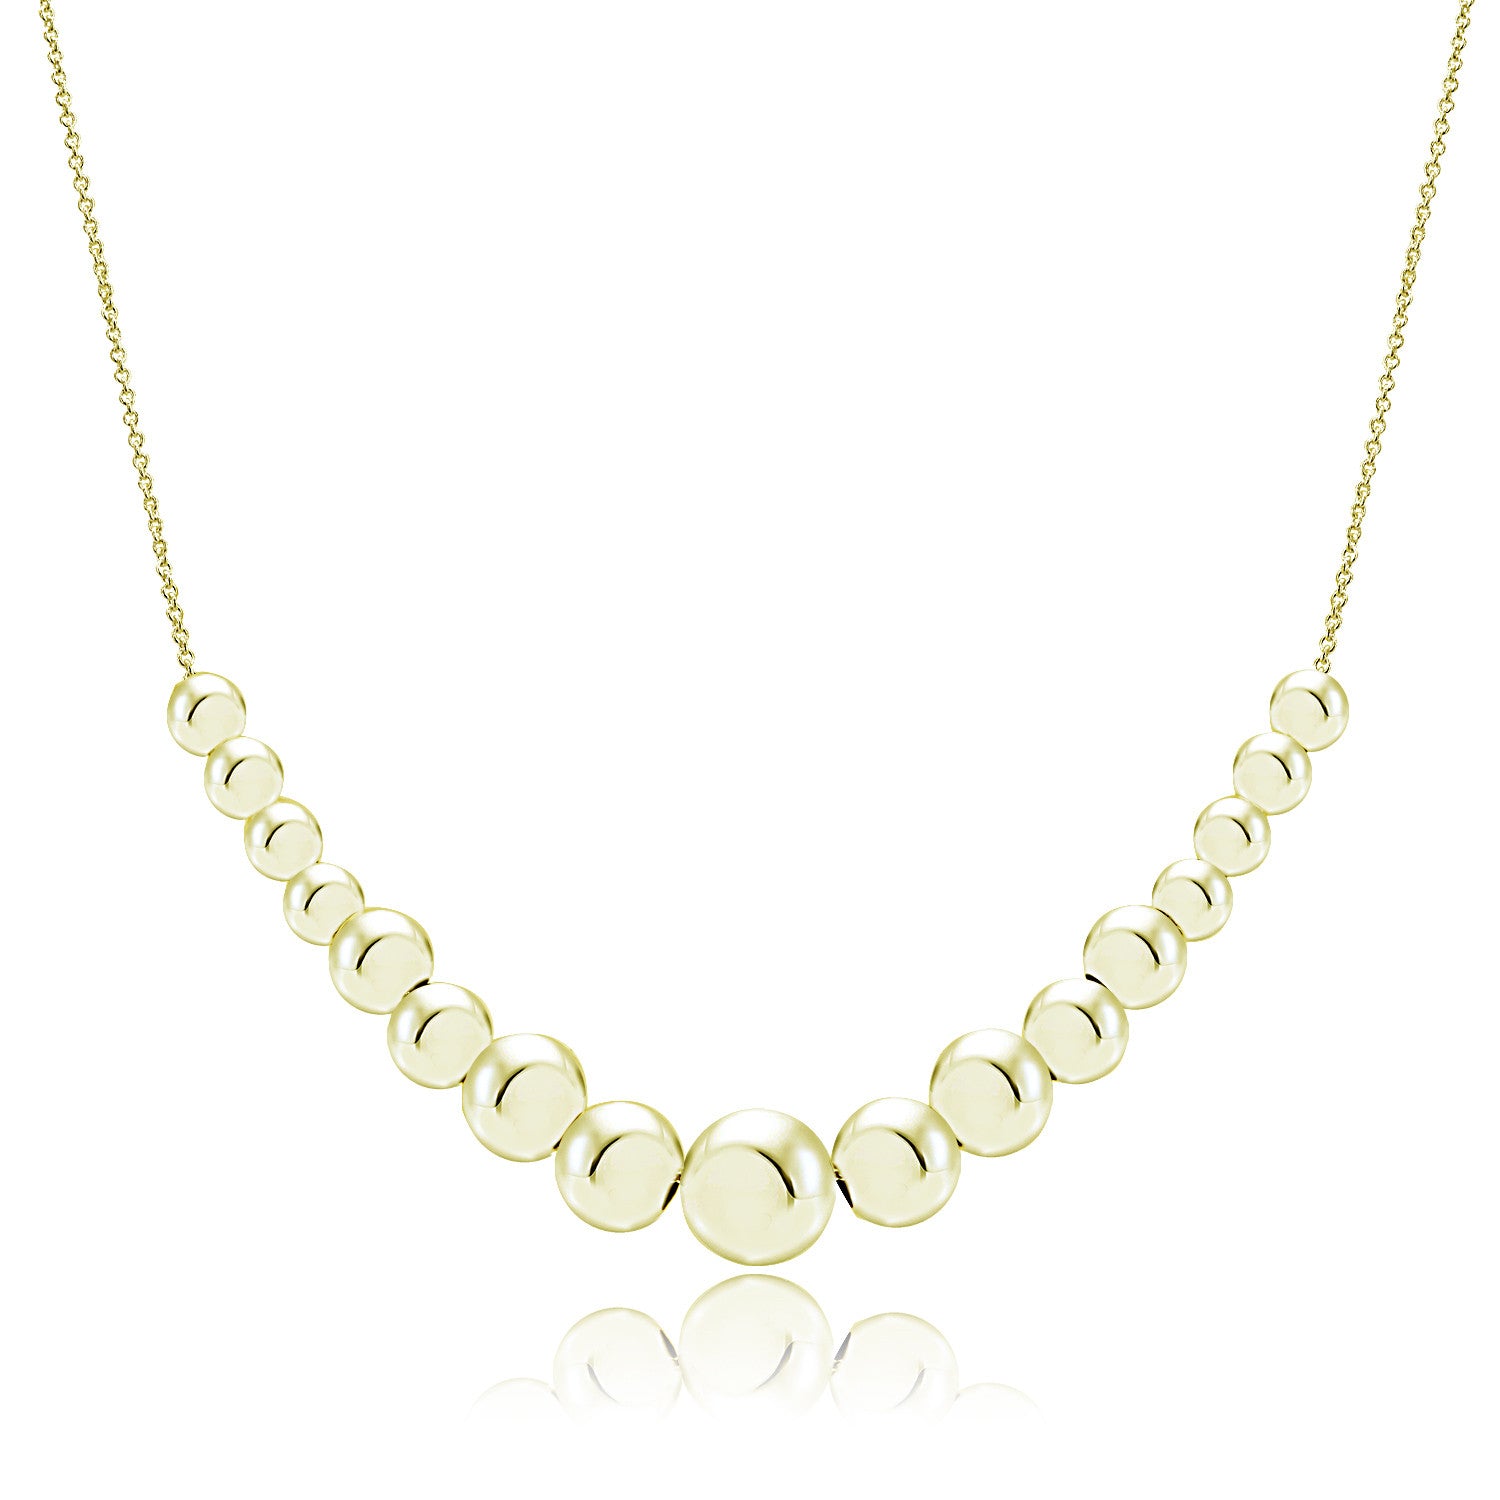 Beaded Sterling Silver Necklace - Gold Over Silver